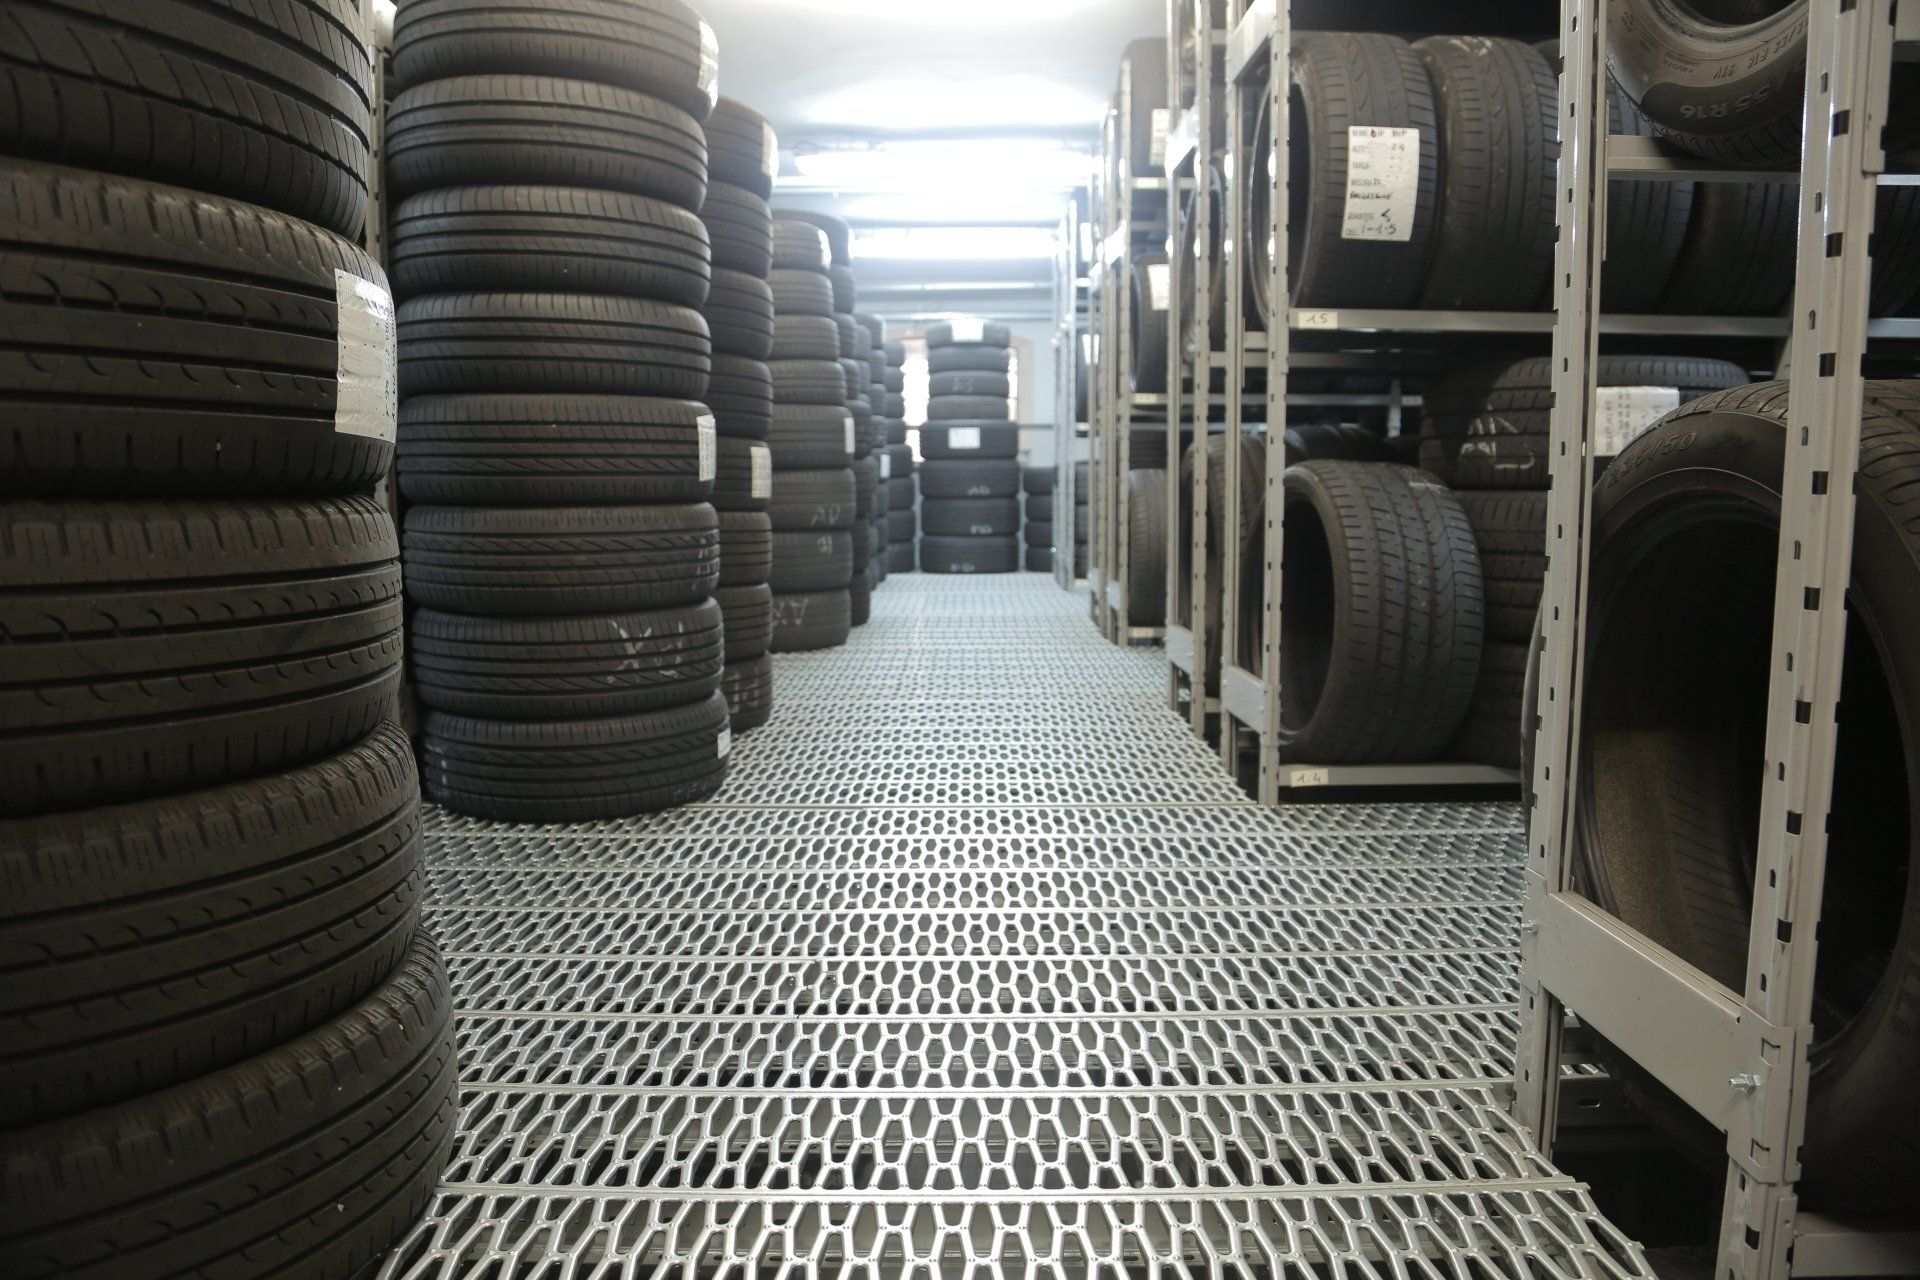 Find Tires at Mike's Service Center in Green Bay, WI